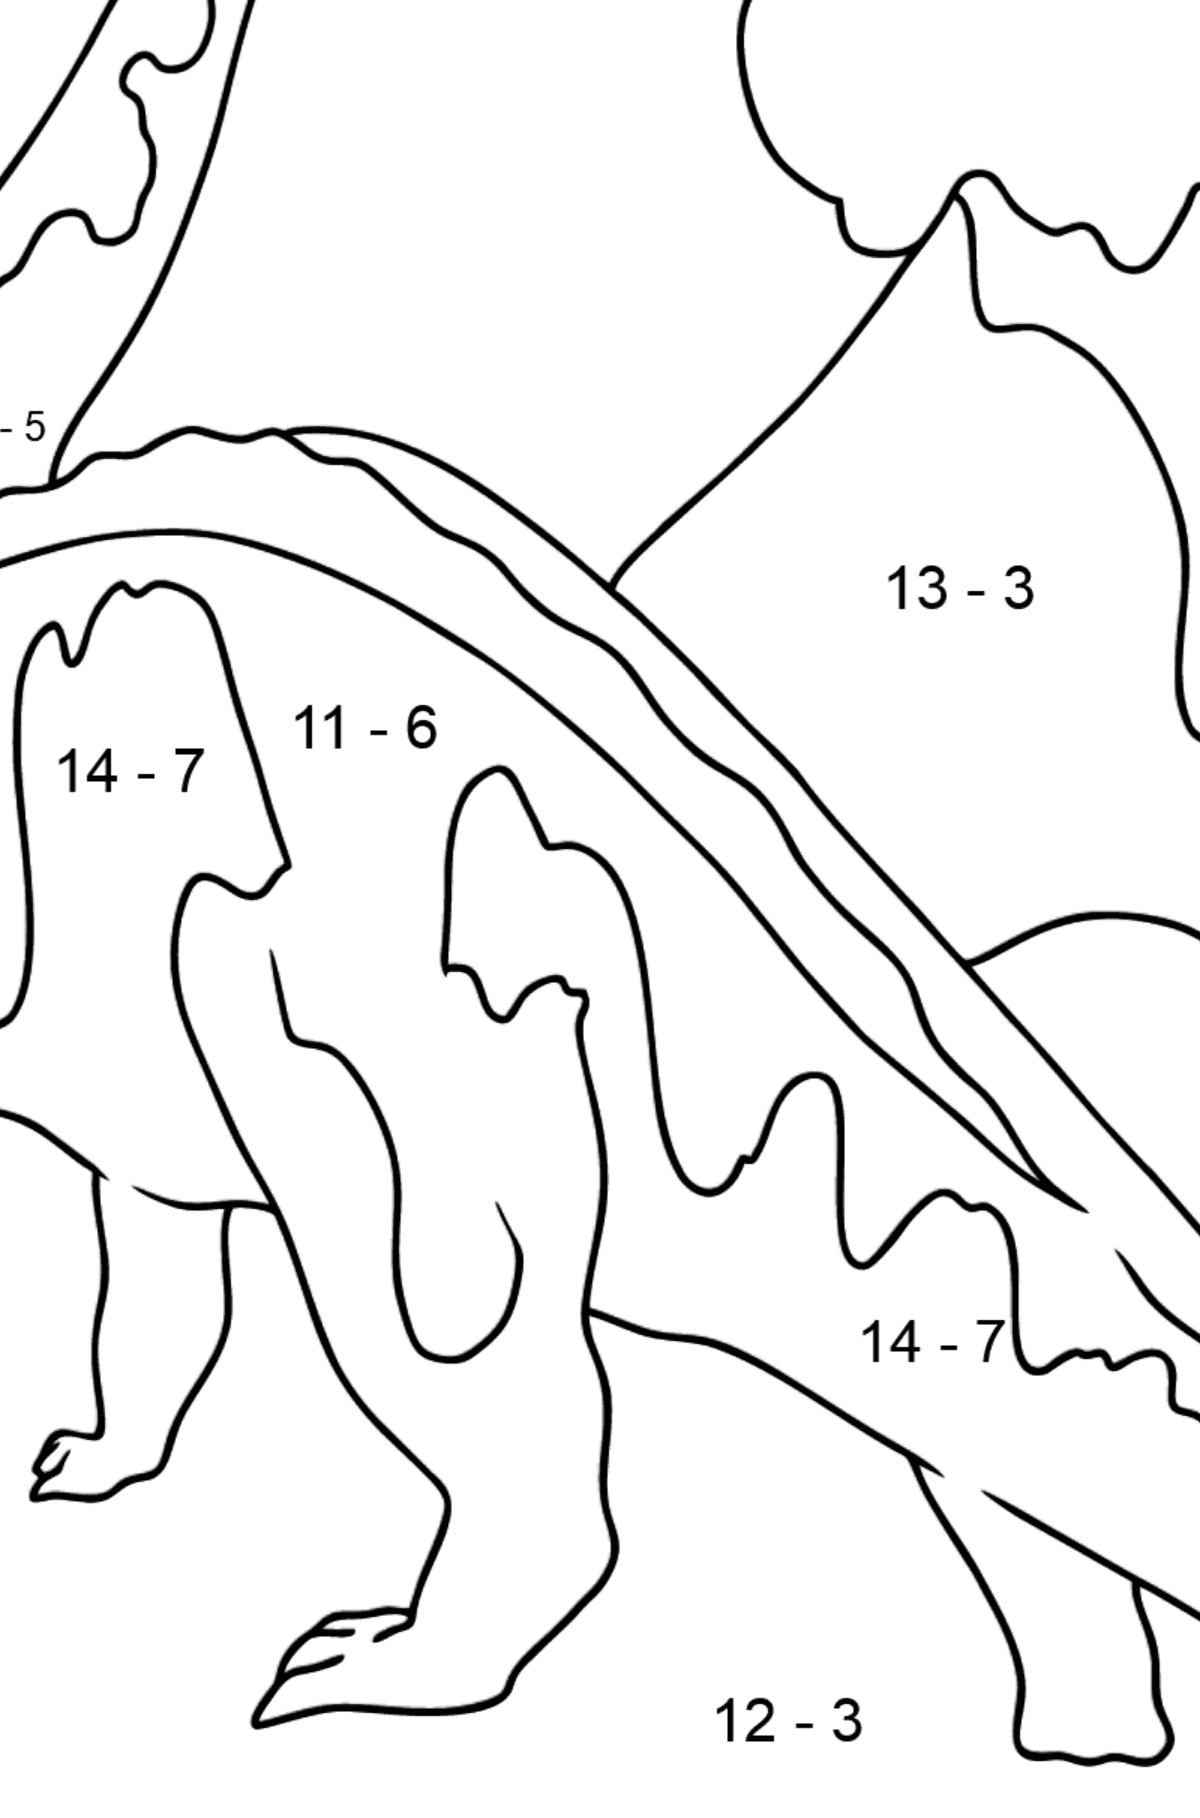 Brontosaurus Coloring Page - Math Coloring - Subtraction for Kids